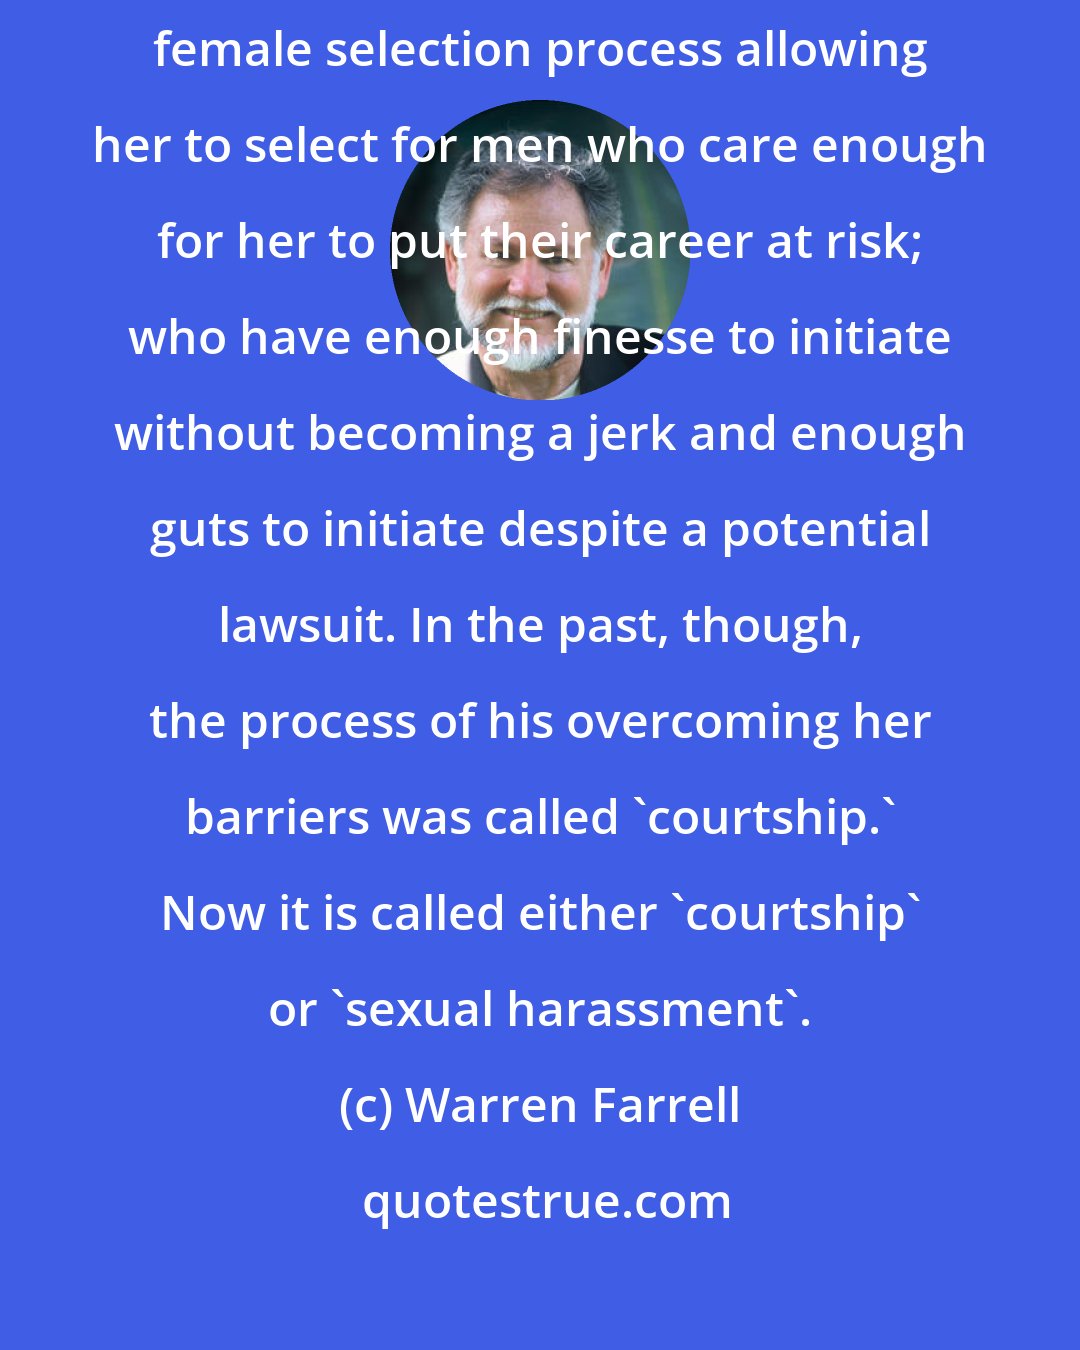 Warren Farrell: In a sense, sexual harassment lawsuits are just the latest version of the female selection process allowing her to select for men who care enough for her to put their career at risk; who have enough finesse to initiate without becoming a jerk and enough guts to initiate despite a potential lawsuit. In the past, though, the process of his overcoming her barriers was called 'courtship.' Now it is called either 'courtship' or 'sexual harassment'.